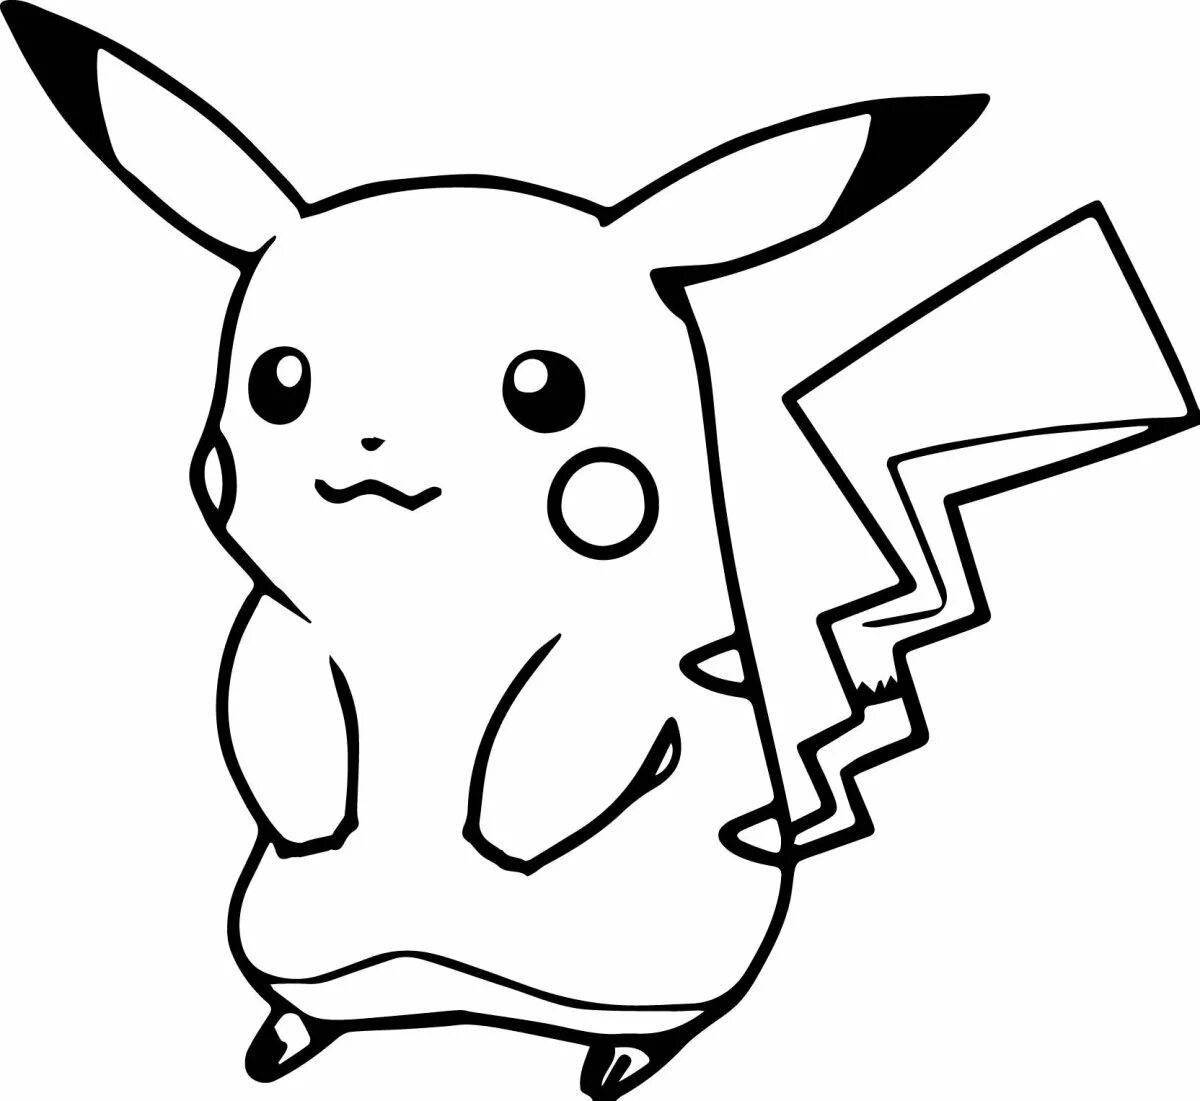 Great pikachu coloring book for boys